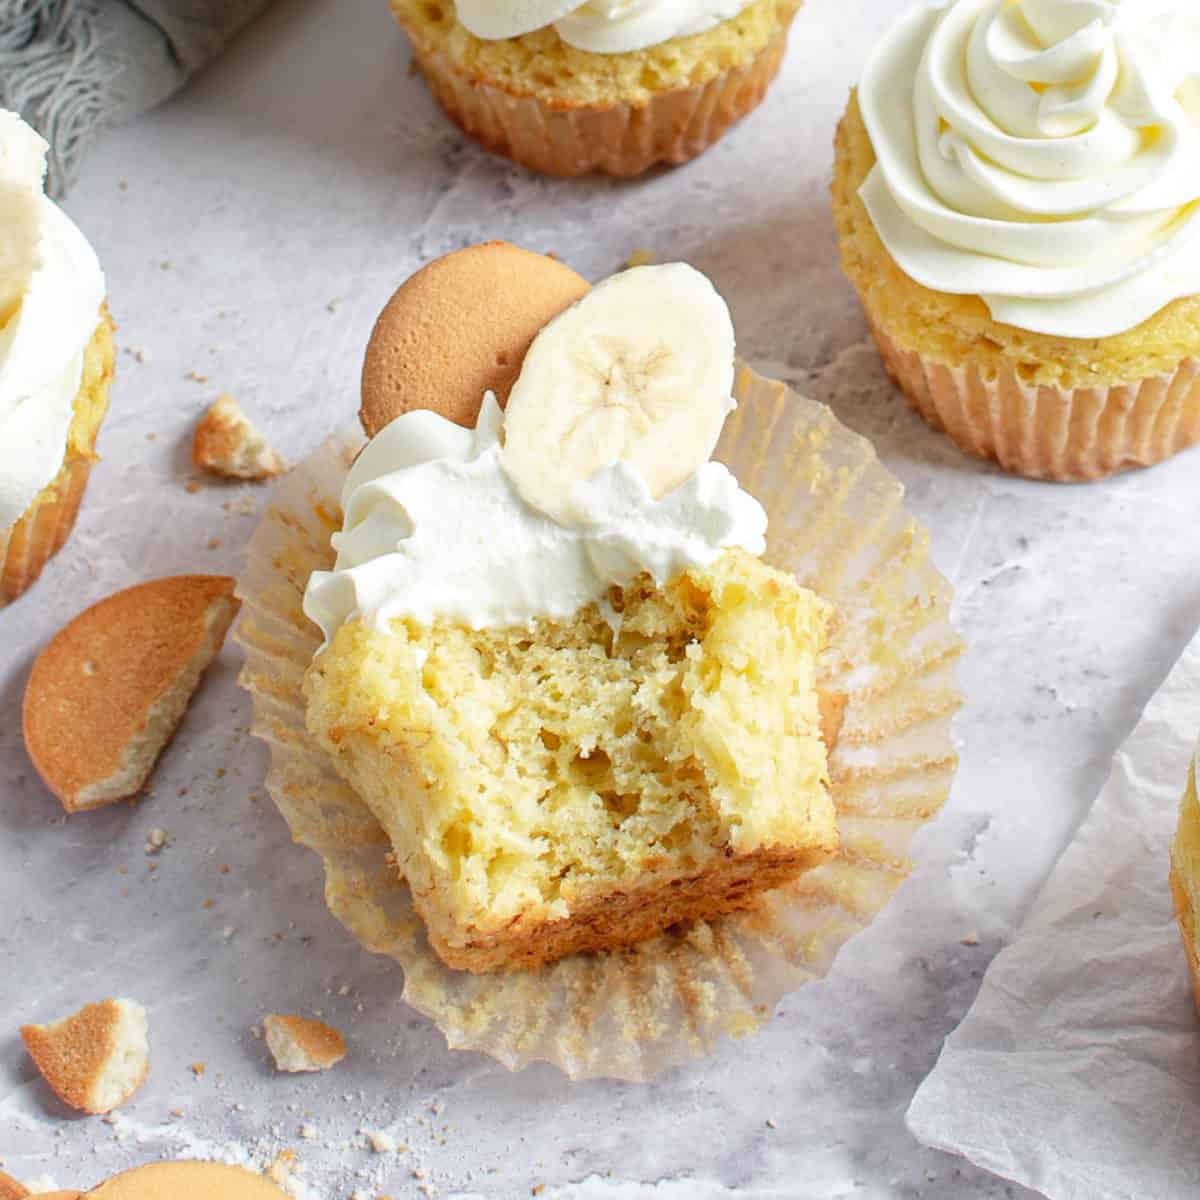 A banana cream cupcake with a bit taken out of it.